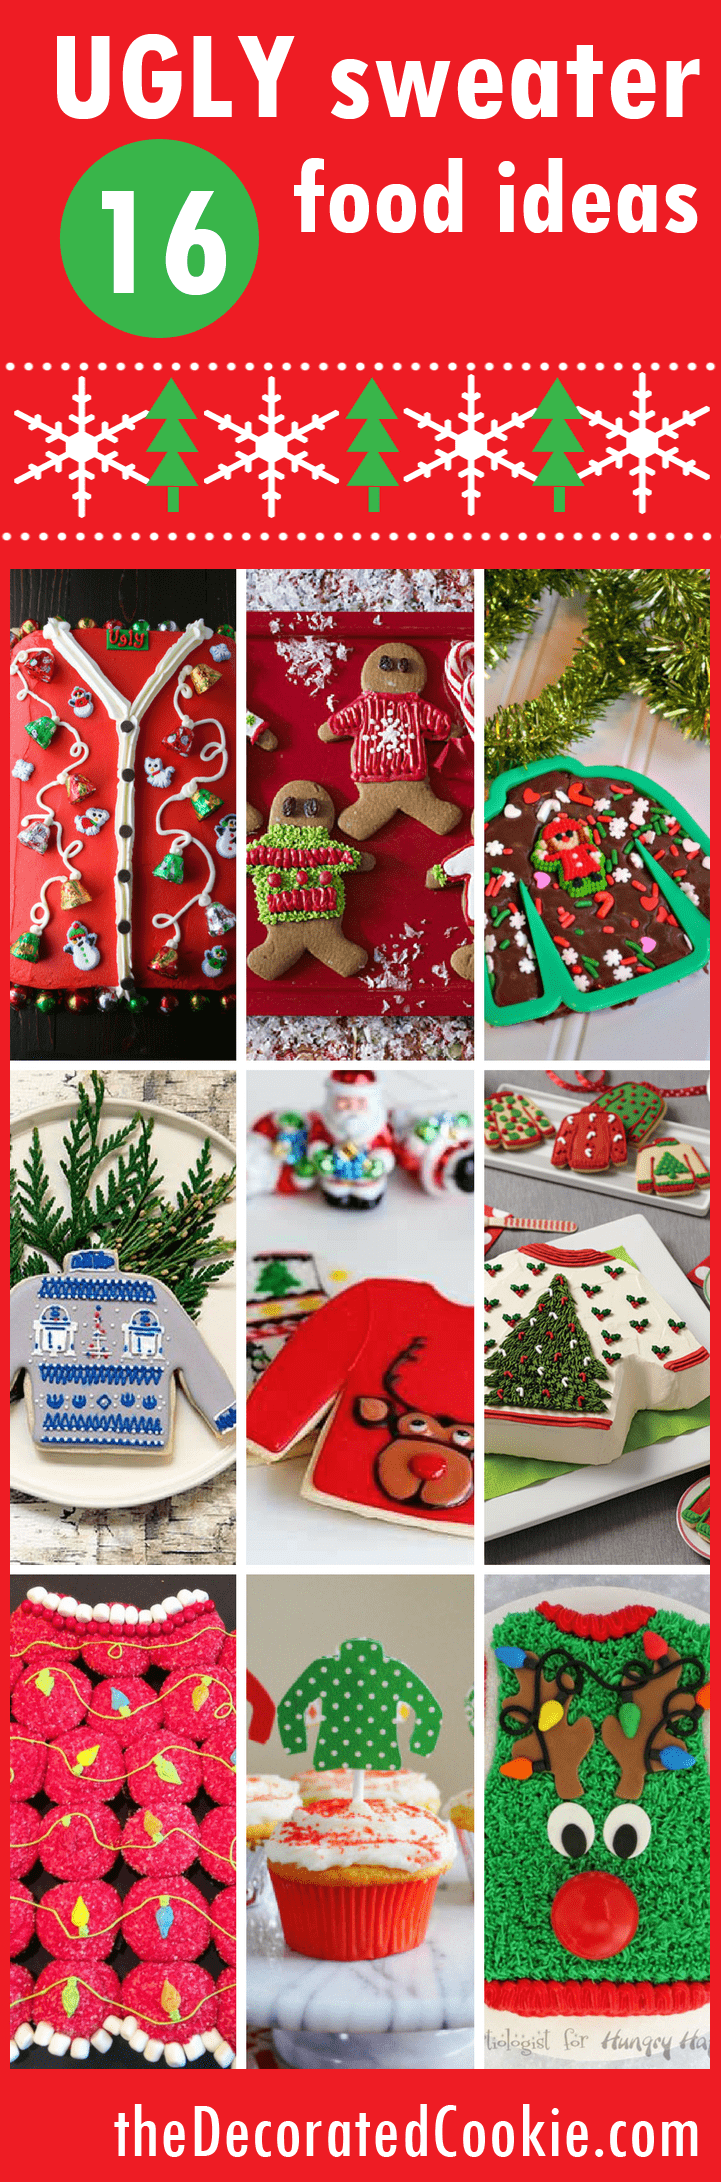 16 ugly sweater food ideas for your ugly sweater Christmas party 